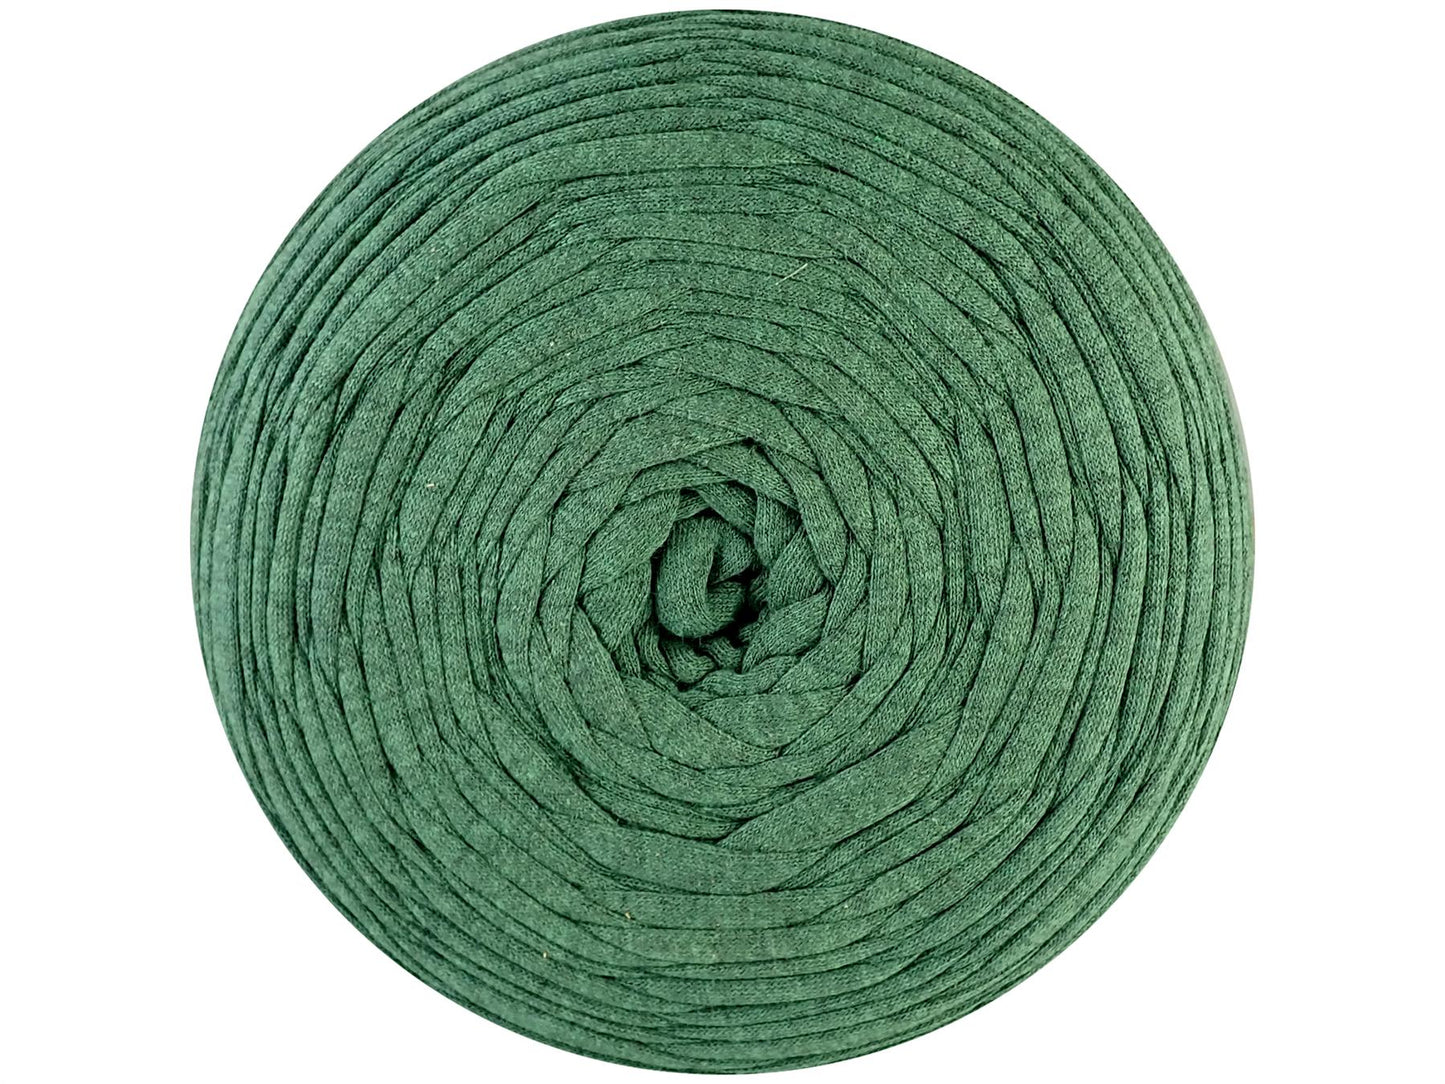 Hoooked Zpagetti Vintage Green Cotton T-Shirt Yarn - 120M 700g